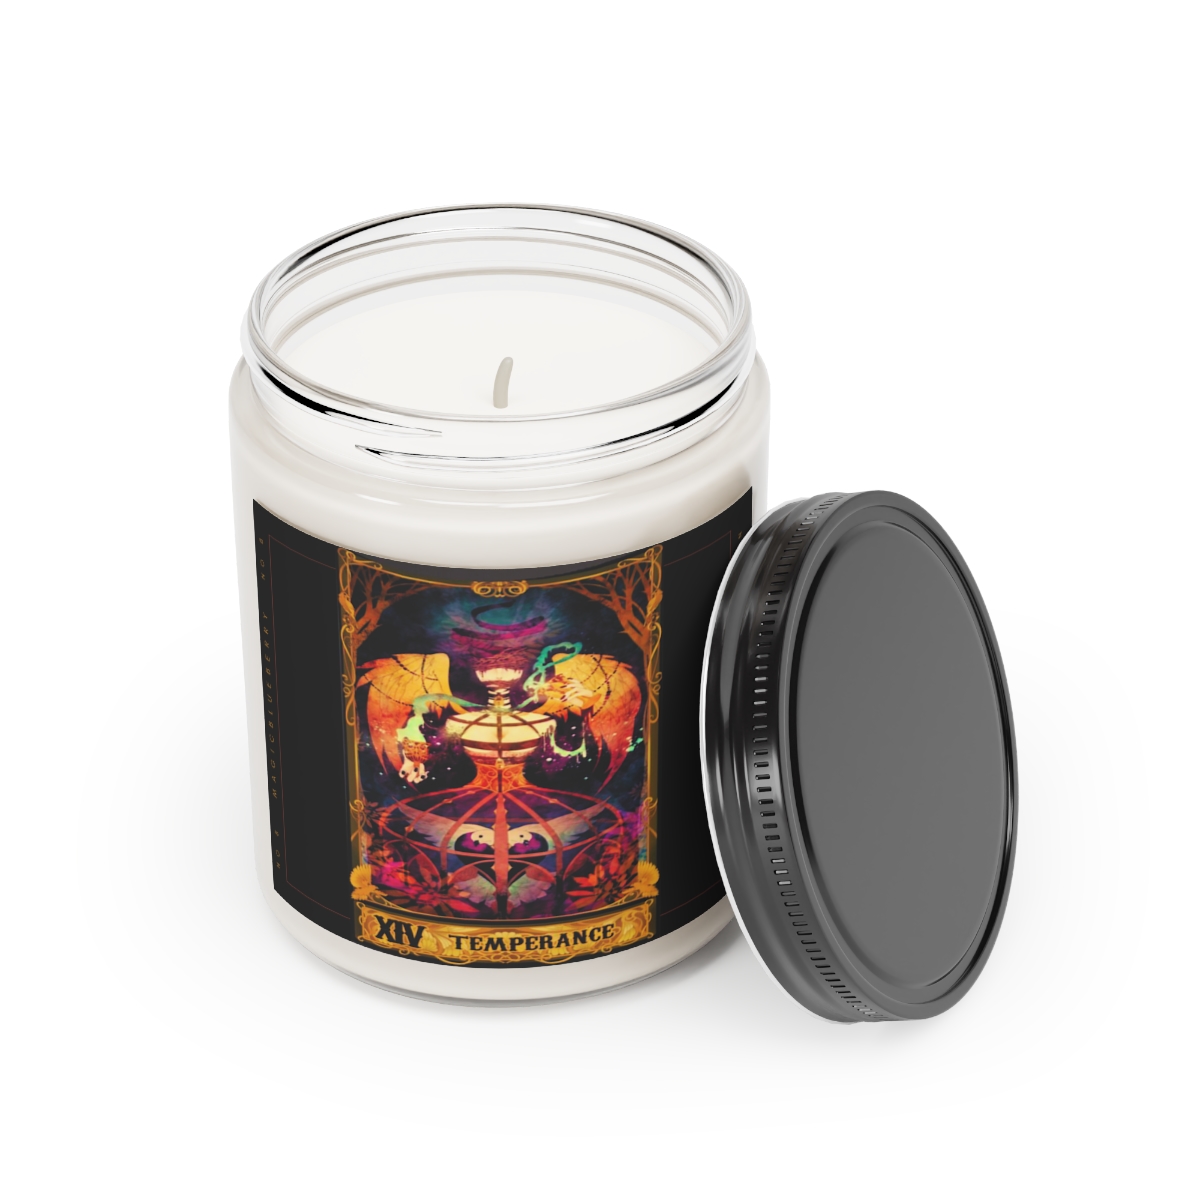 The Temperance - Scented Vegan Soy Wax Candles, Clear Jar Candle, Spell Candles, Tarot Candle, Vegan Candle, Cotton Wick Candle product thumbnail image